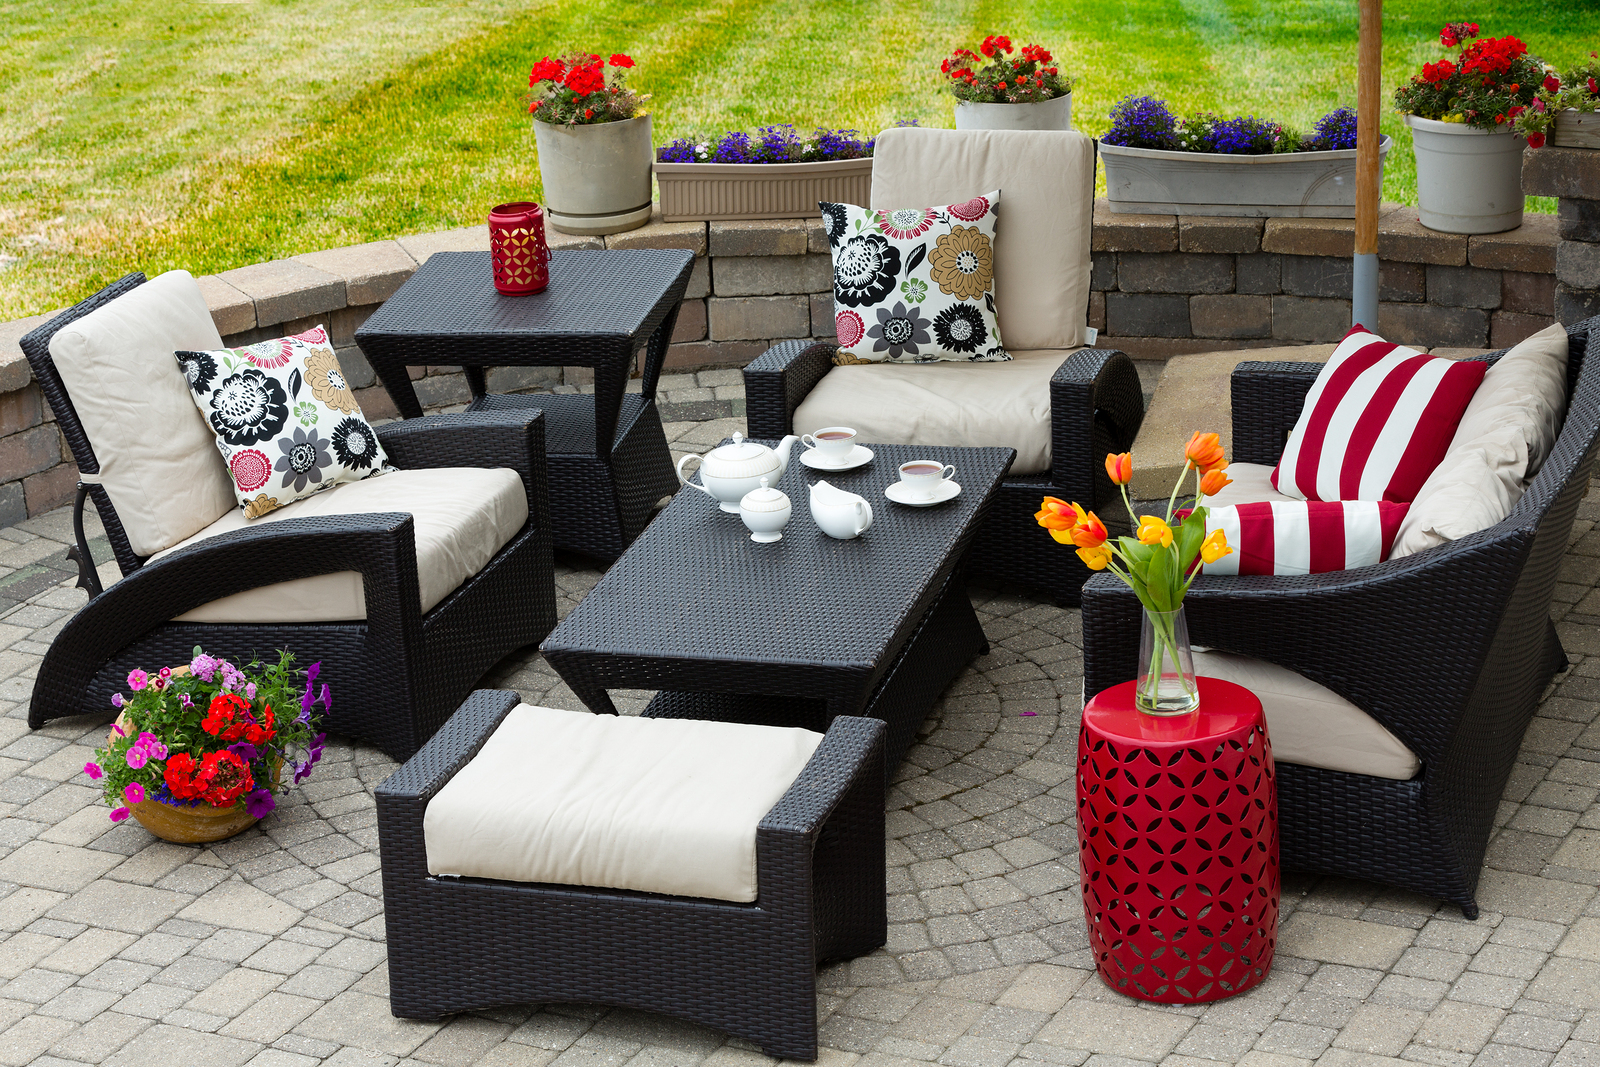 backyard patio decorated with red white and black furniture and flowers